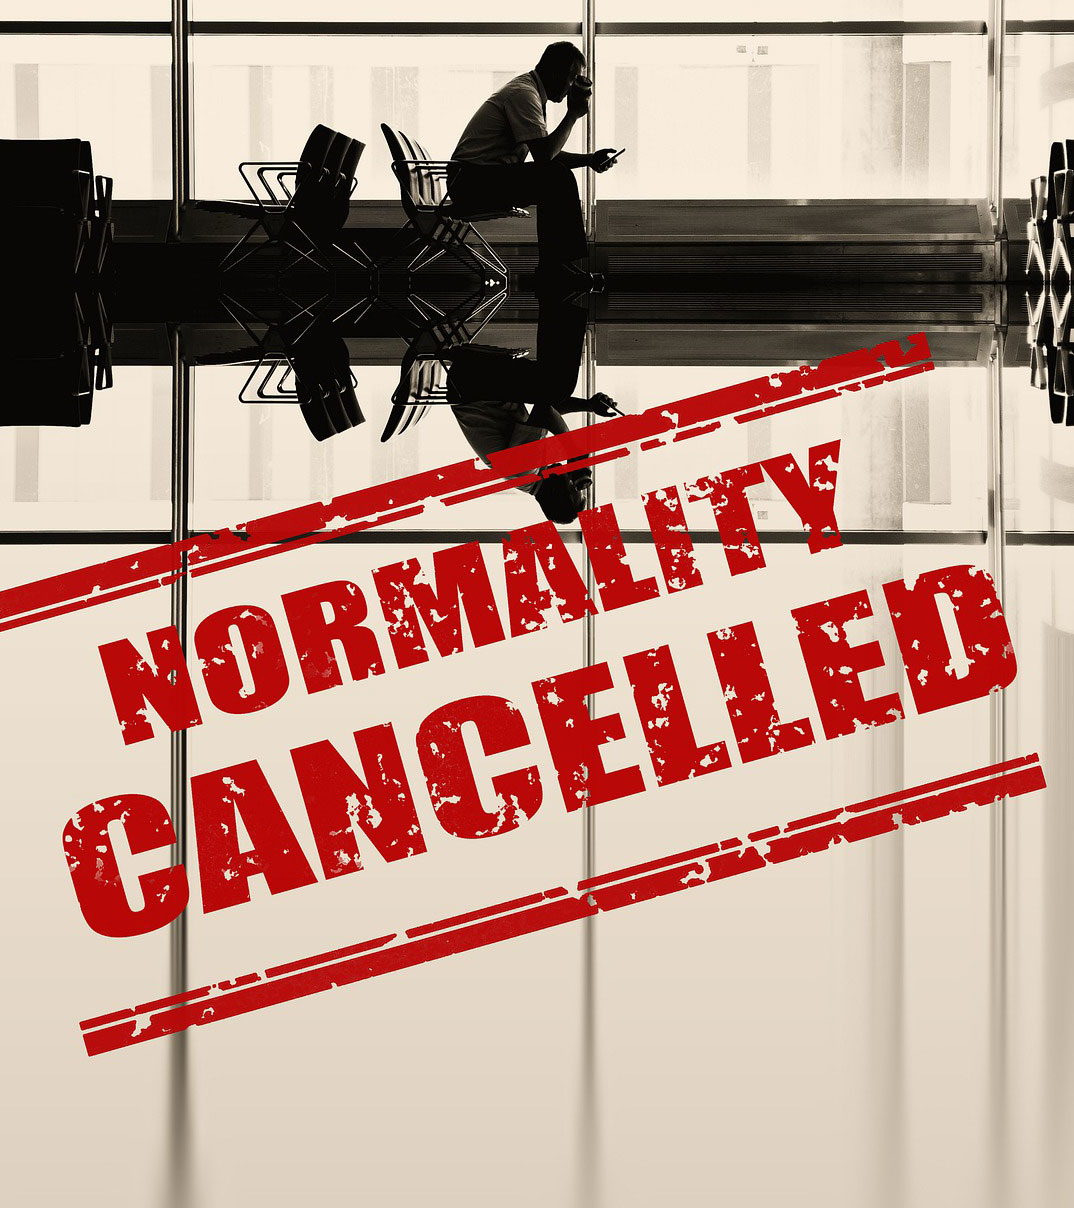 Normality Cancelled